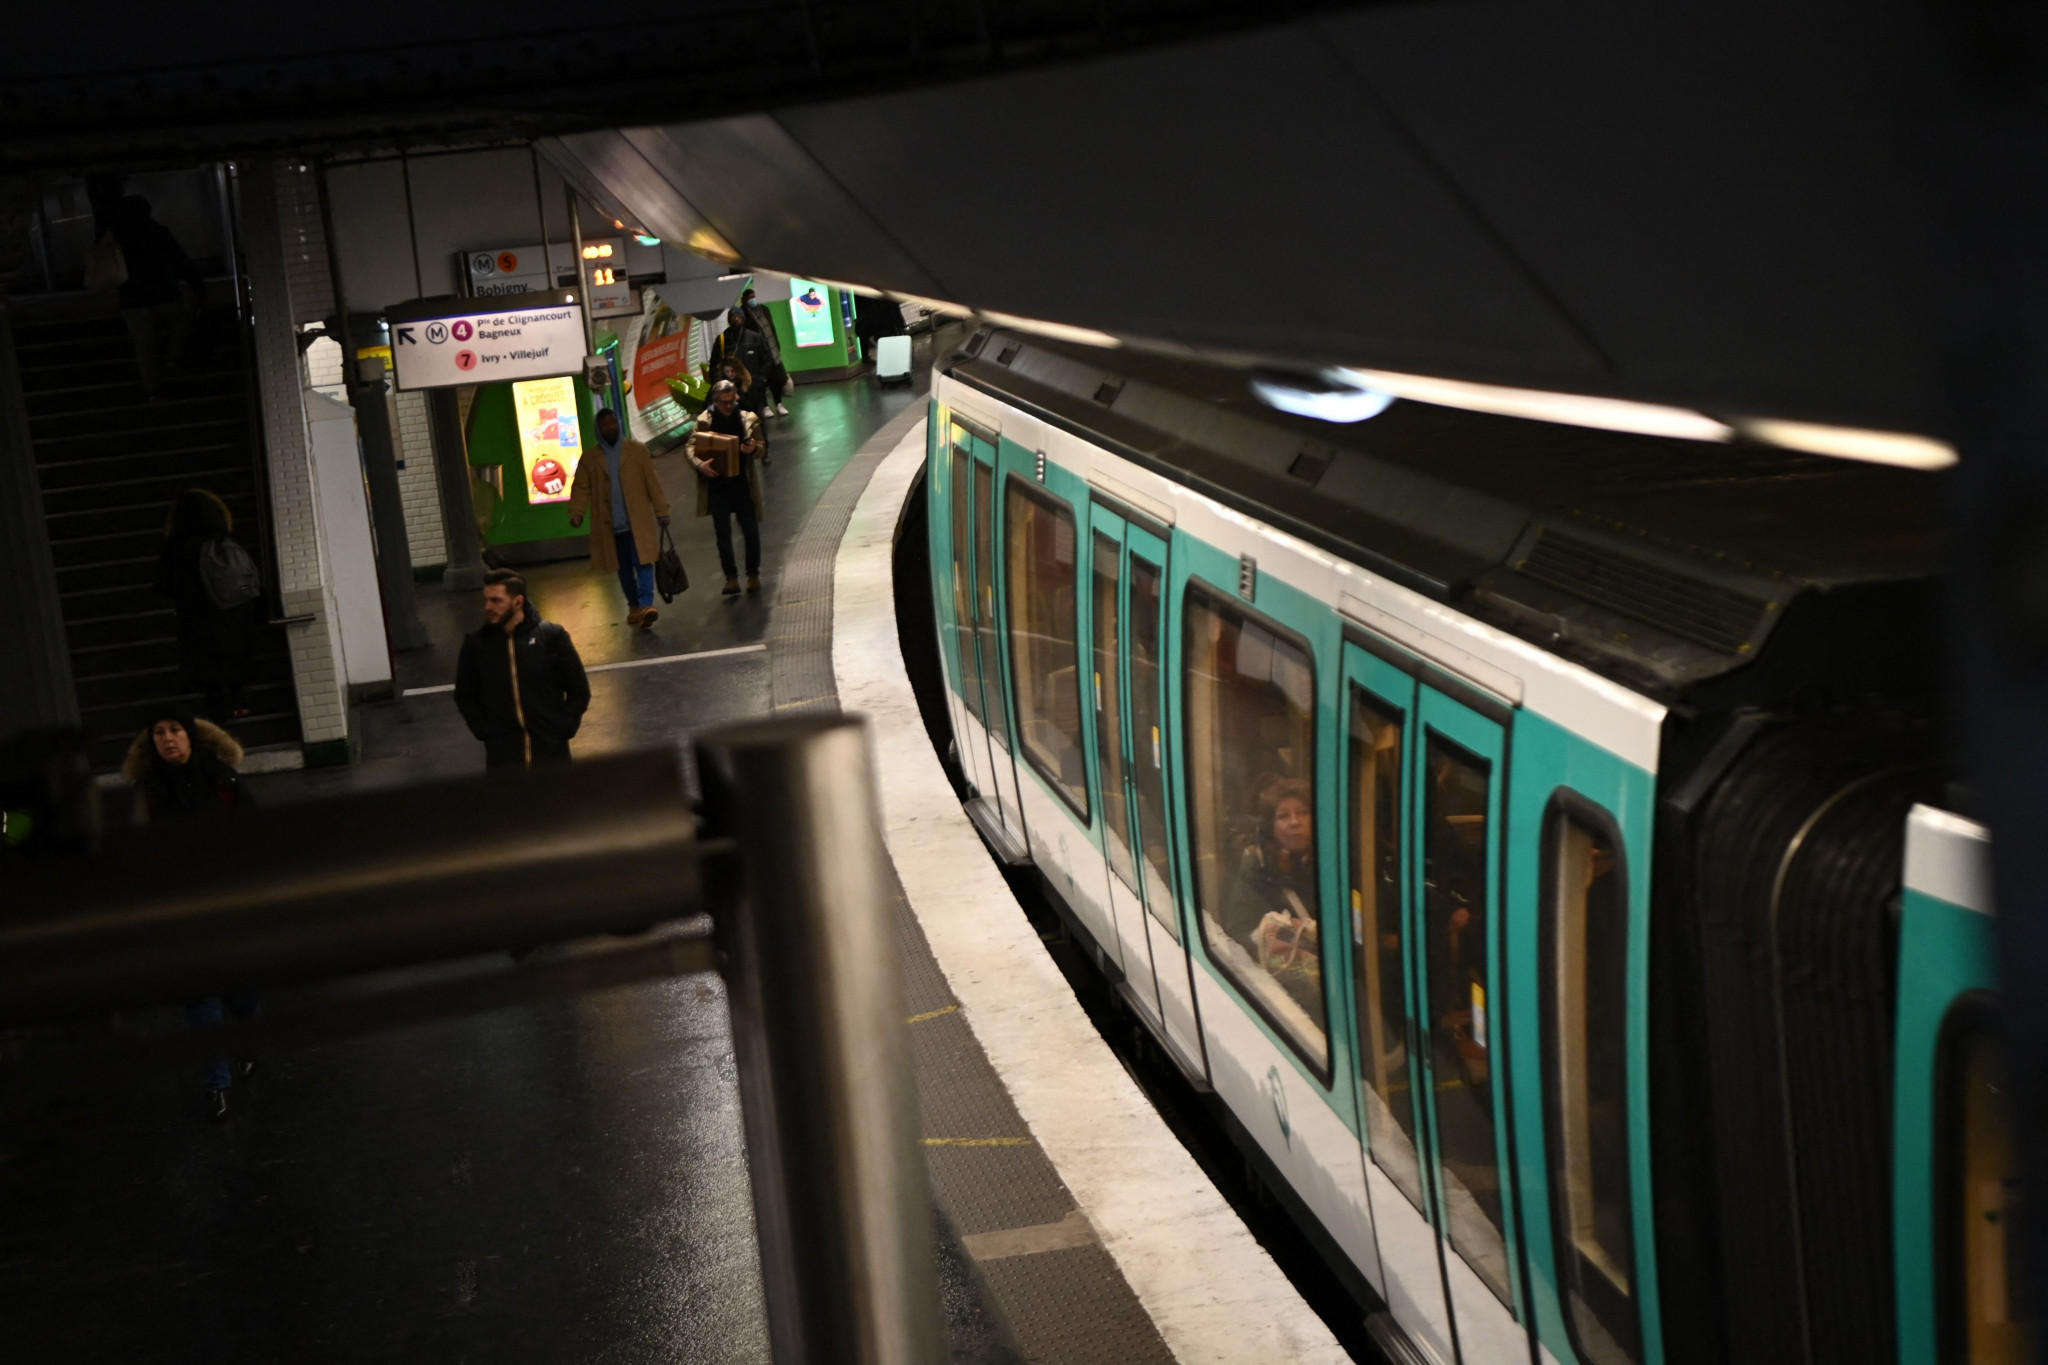 KFS Mobility has secured a contract to assemble seats for thousands of trains in Paris before the Olympics ©Getty Images